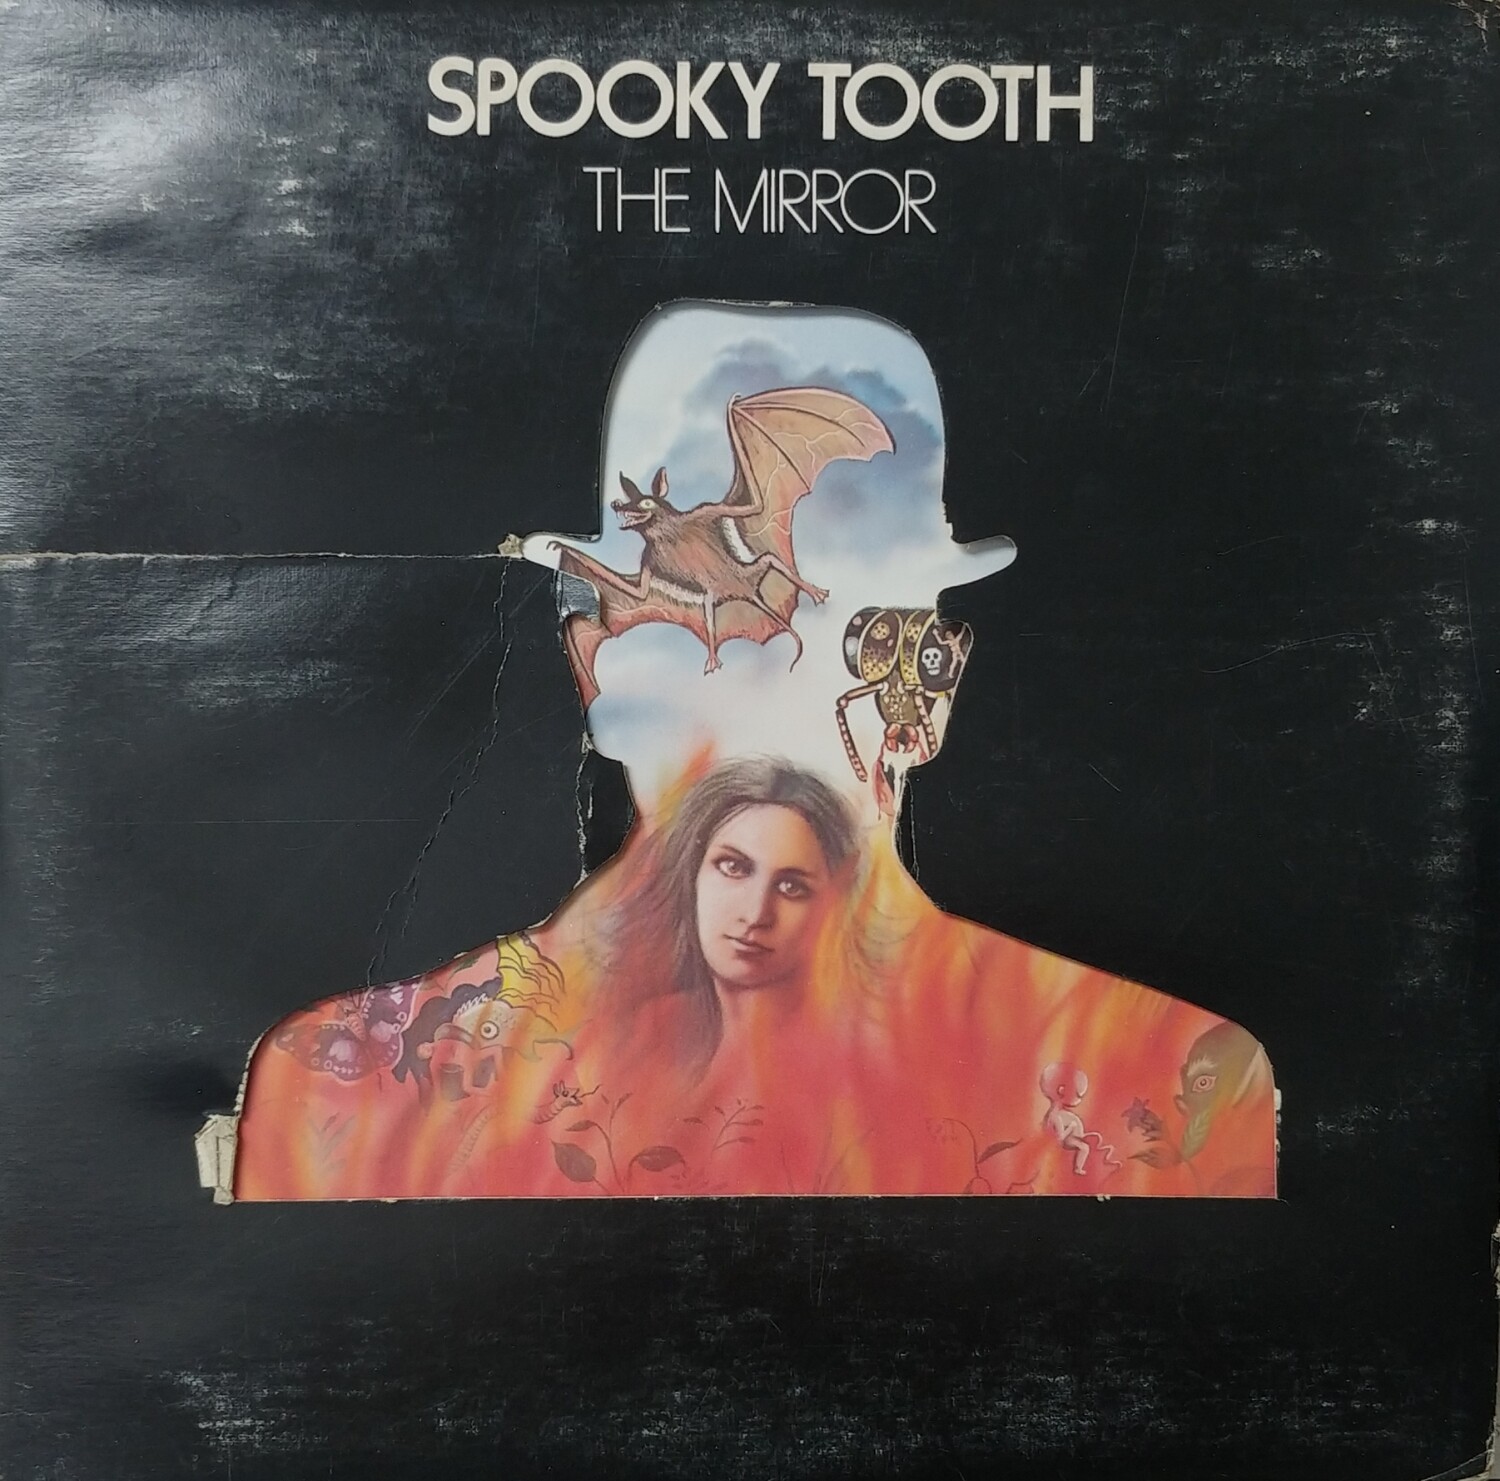 Spooky Tooth - The Mirror